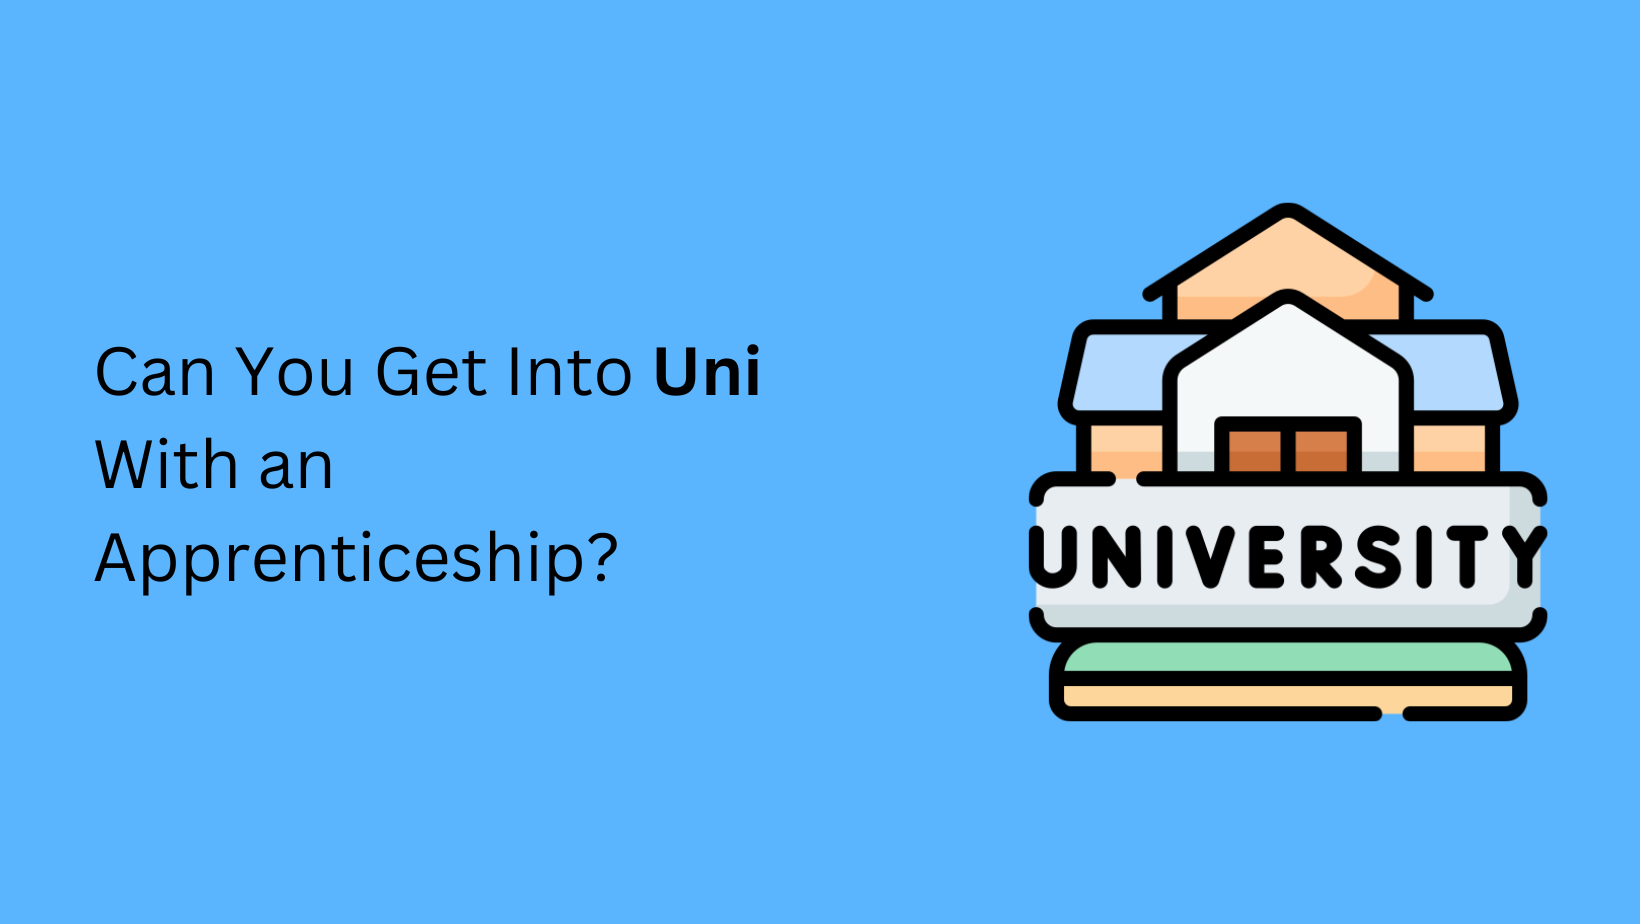 Can You Get Into Uni With an Apprenticeship